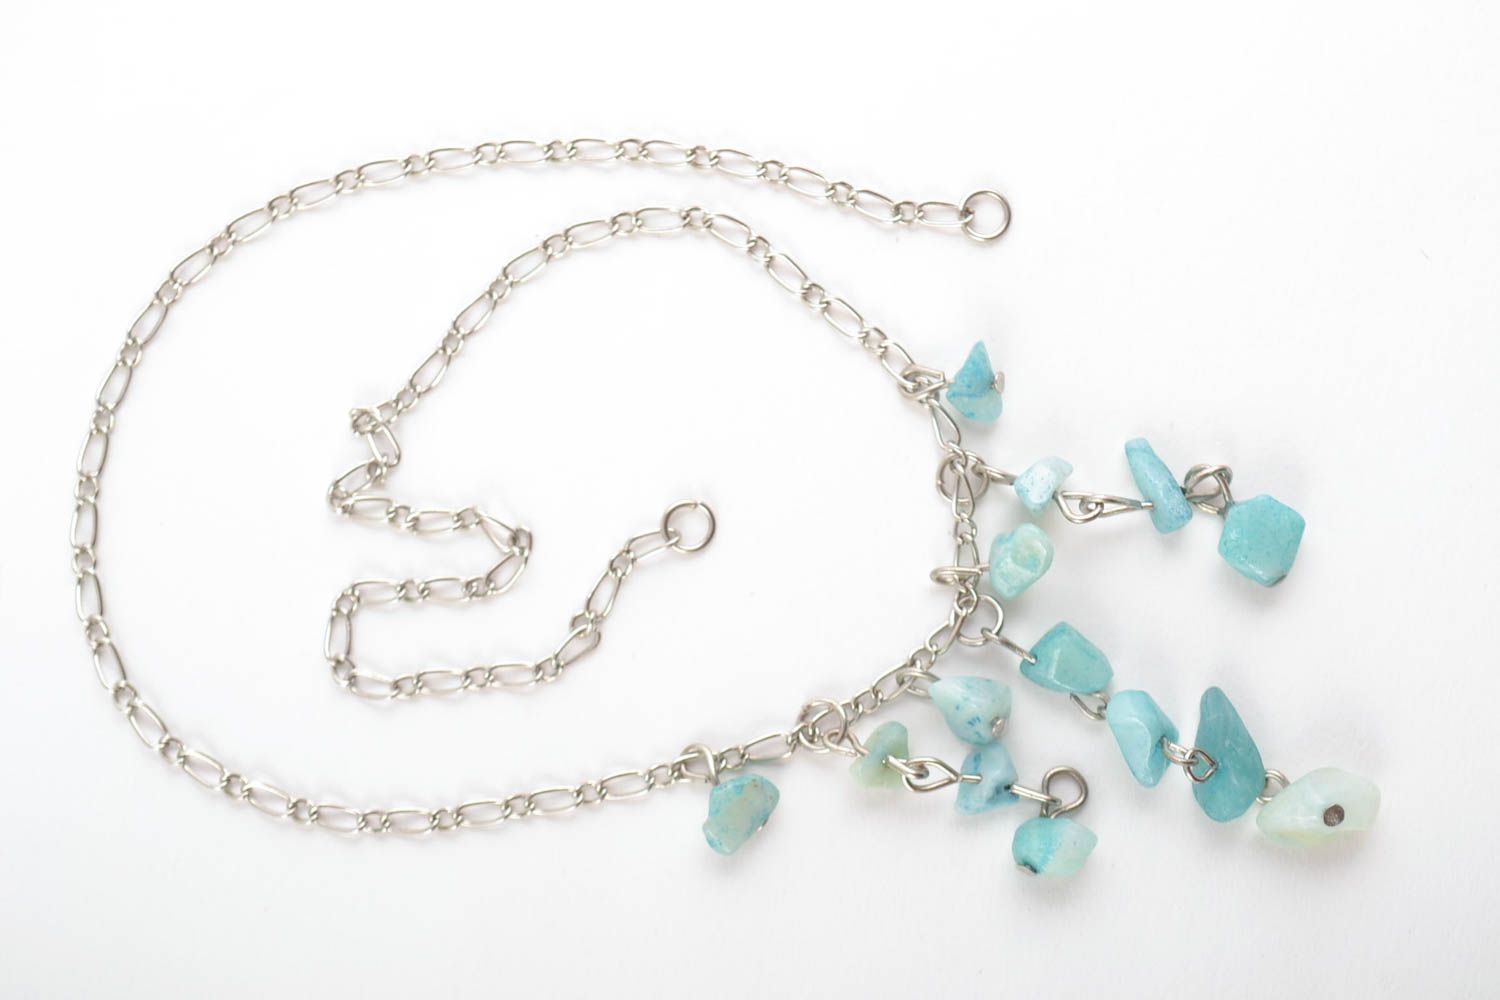 Handmade tender necklace with amazonite stones of turquoise color on metal chain photo 2